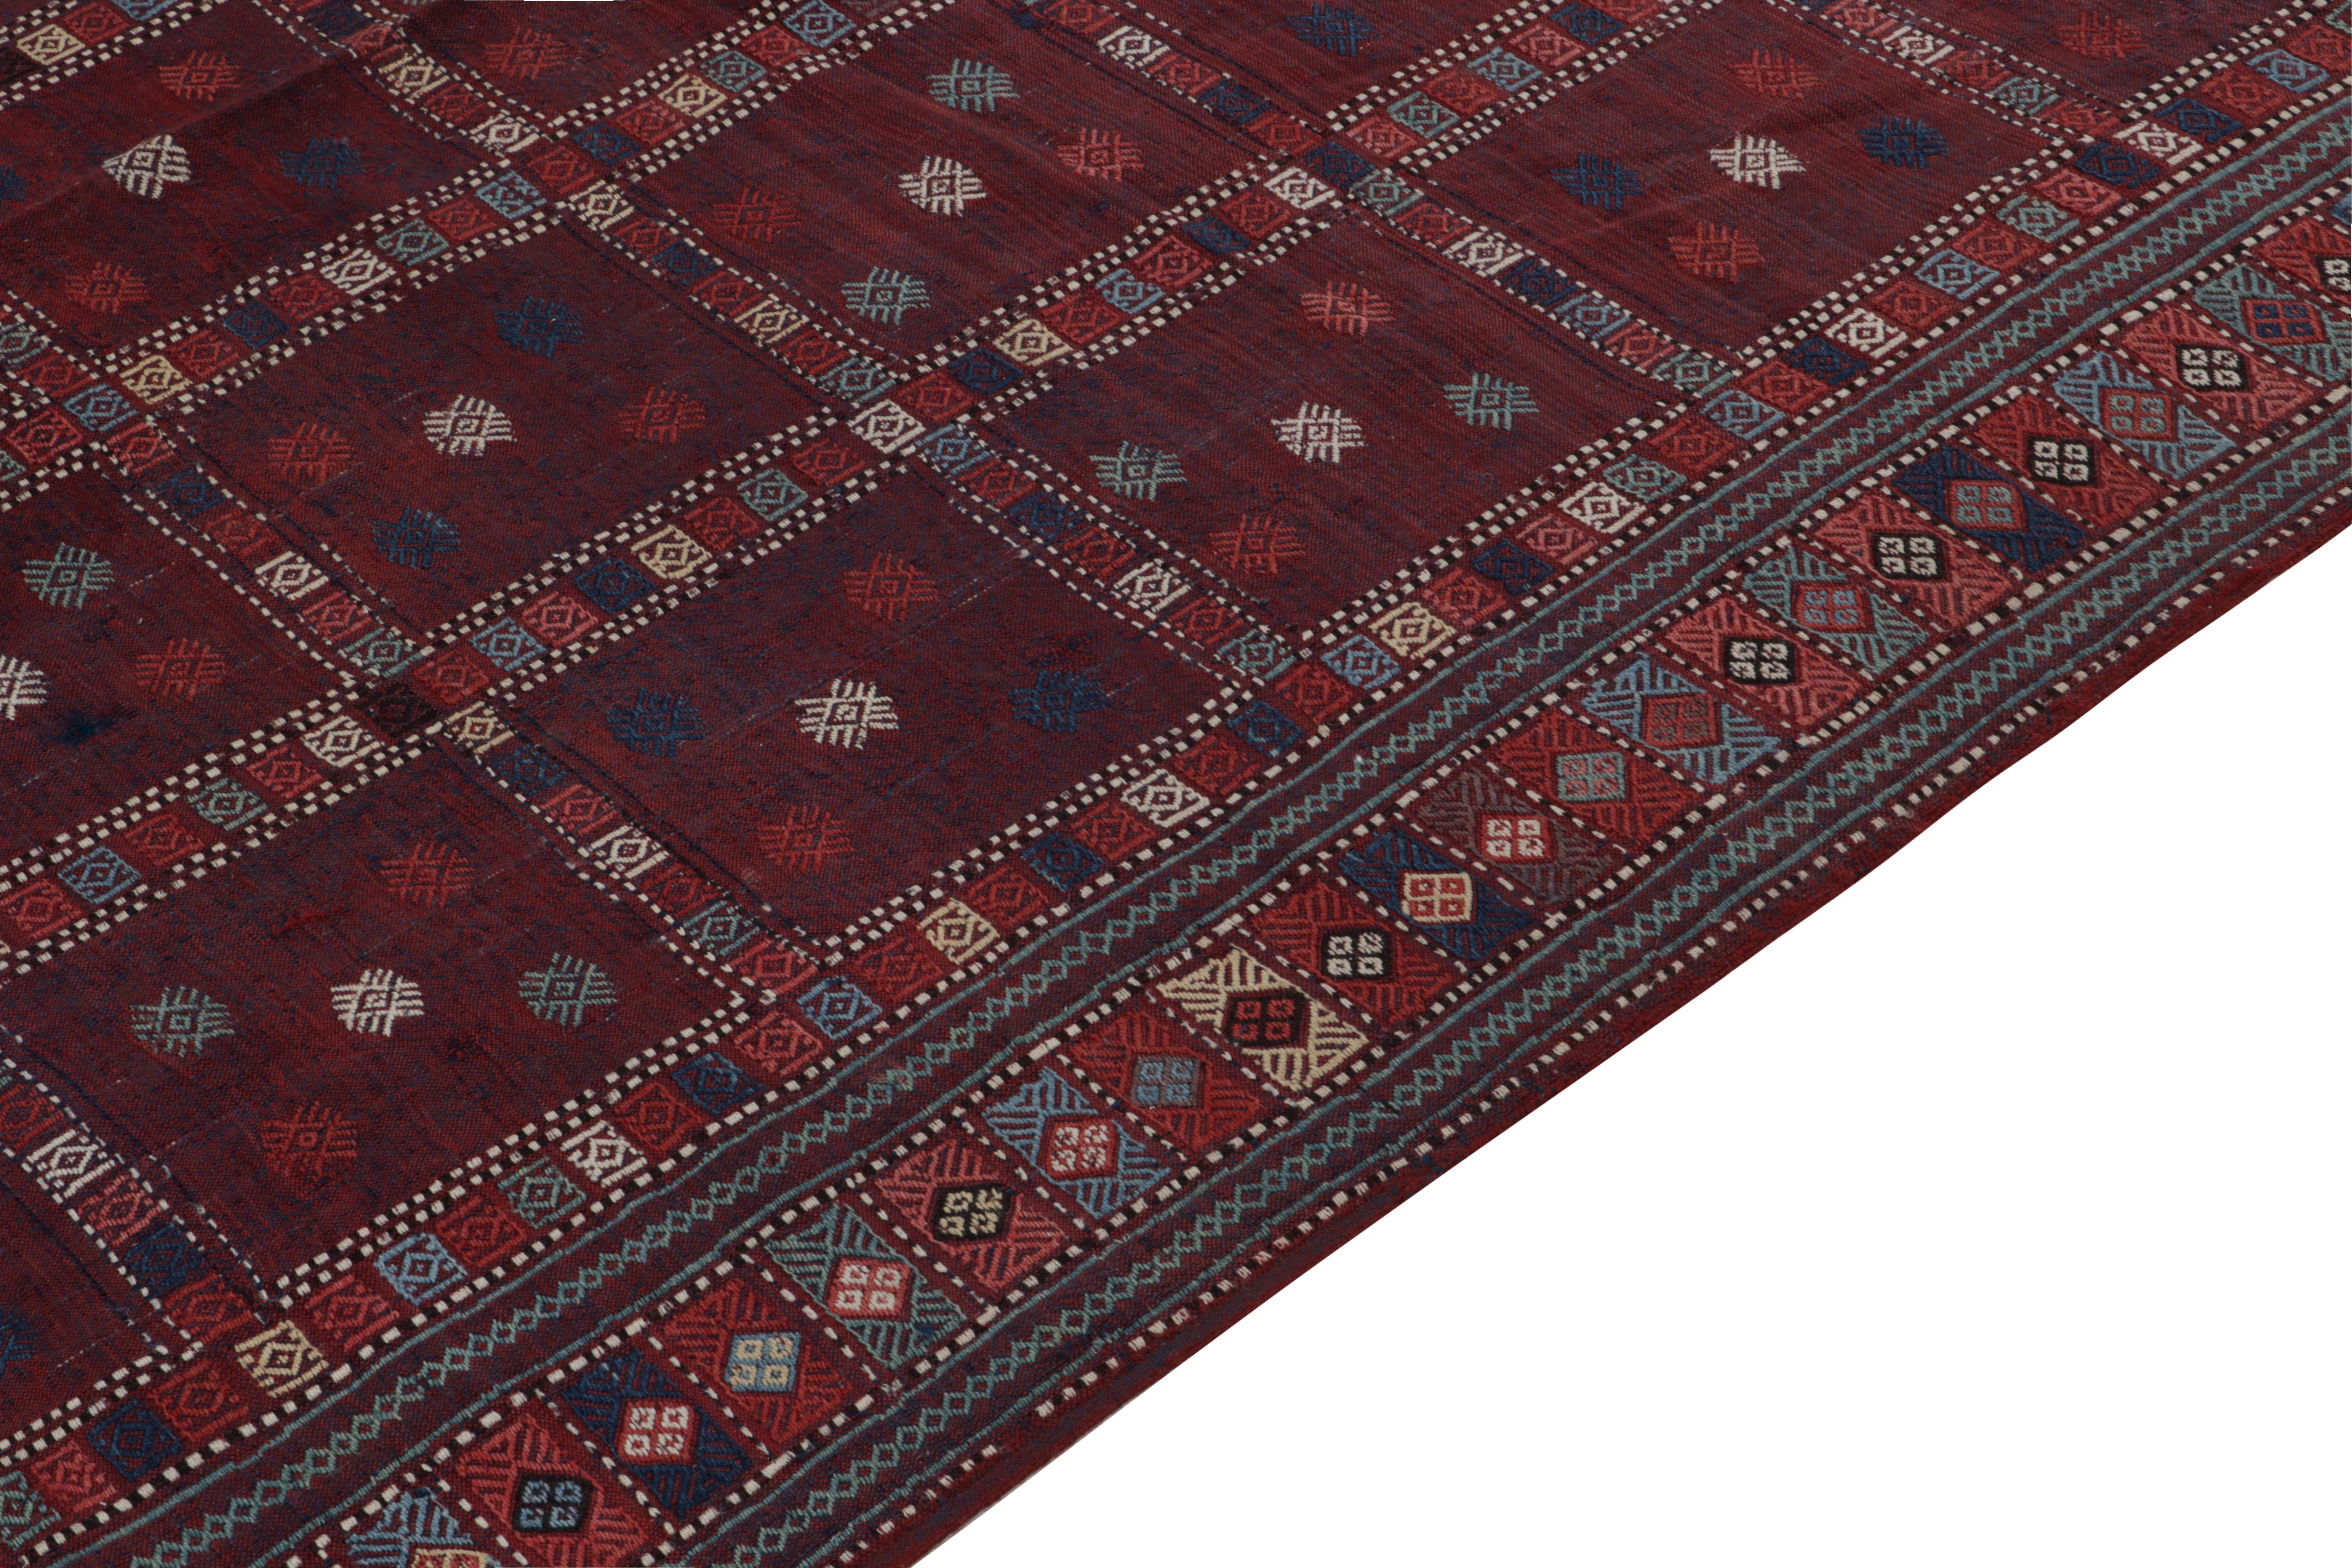 Hand-Knotted Antique Russian Kilim in Red, Blue & White Geometric Patterns by Rug & Kilim For Sale